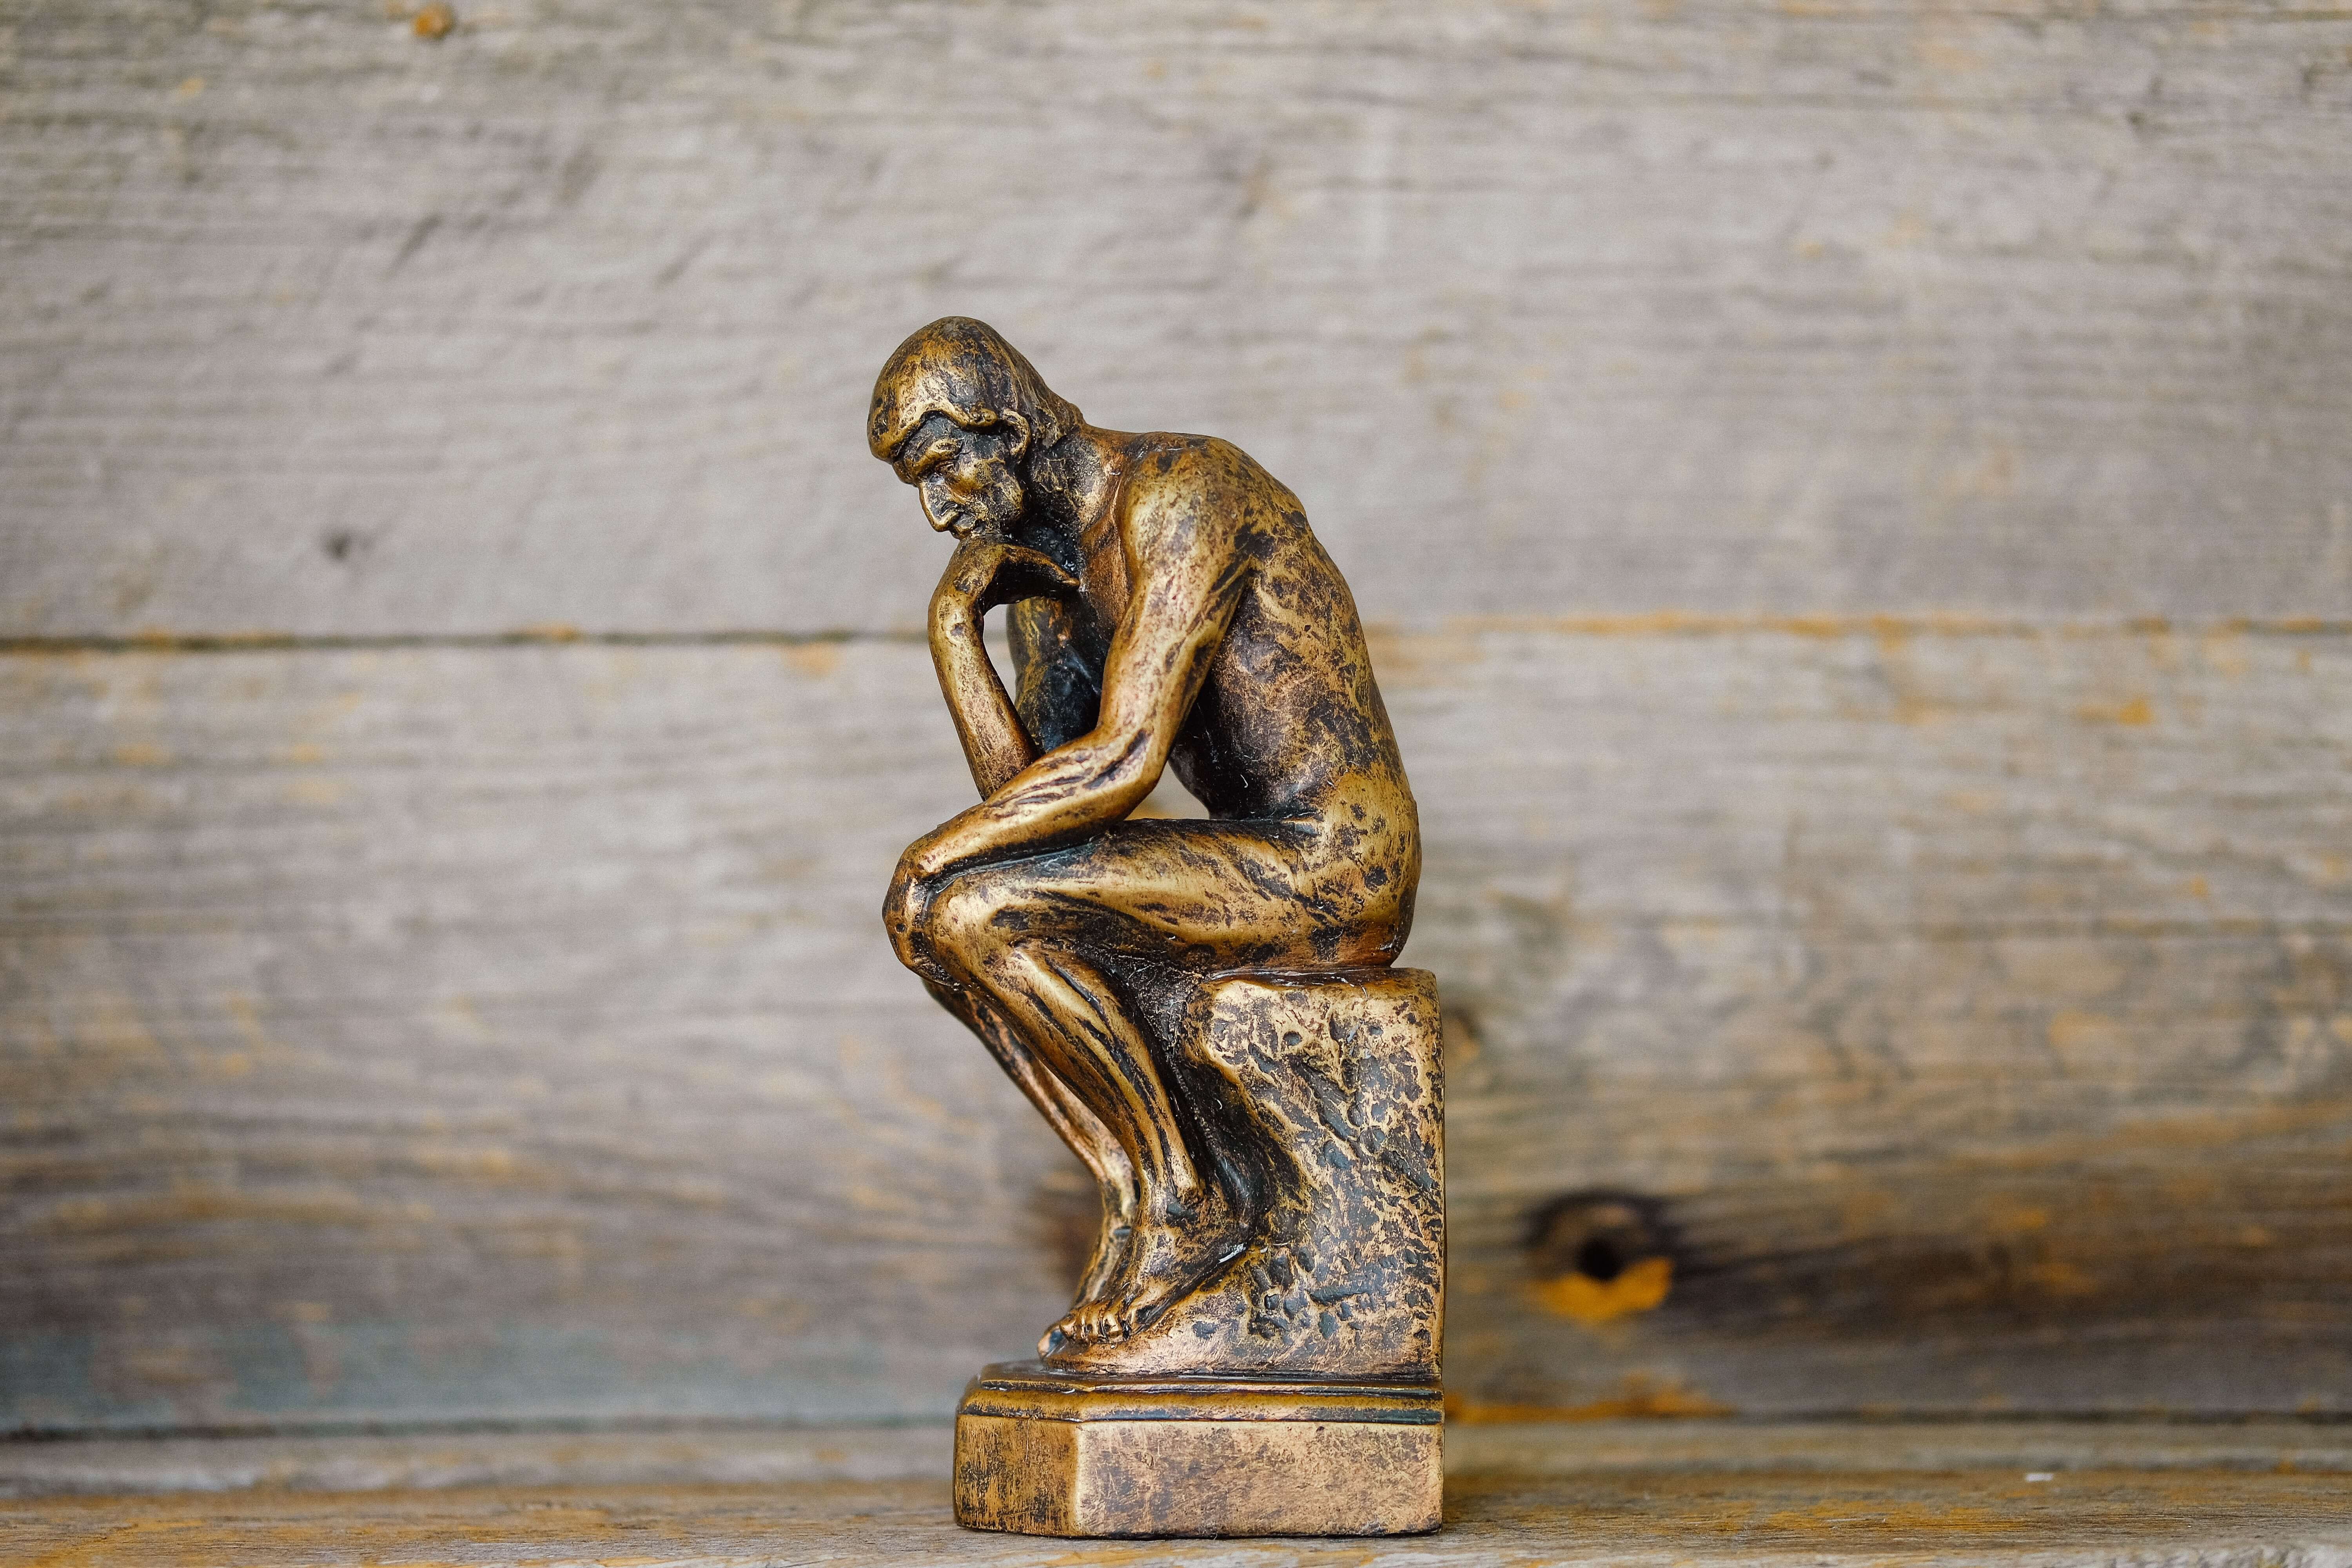 A bronze miniature of the Thinker statue